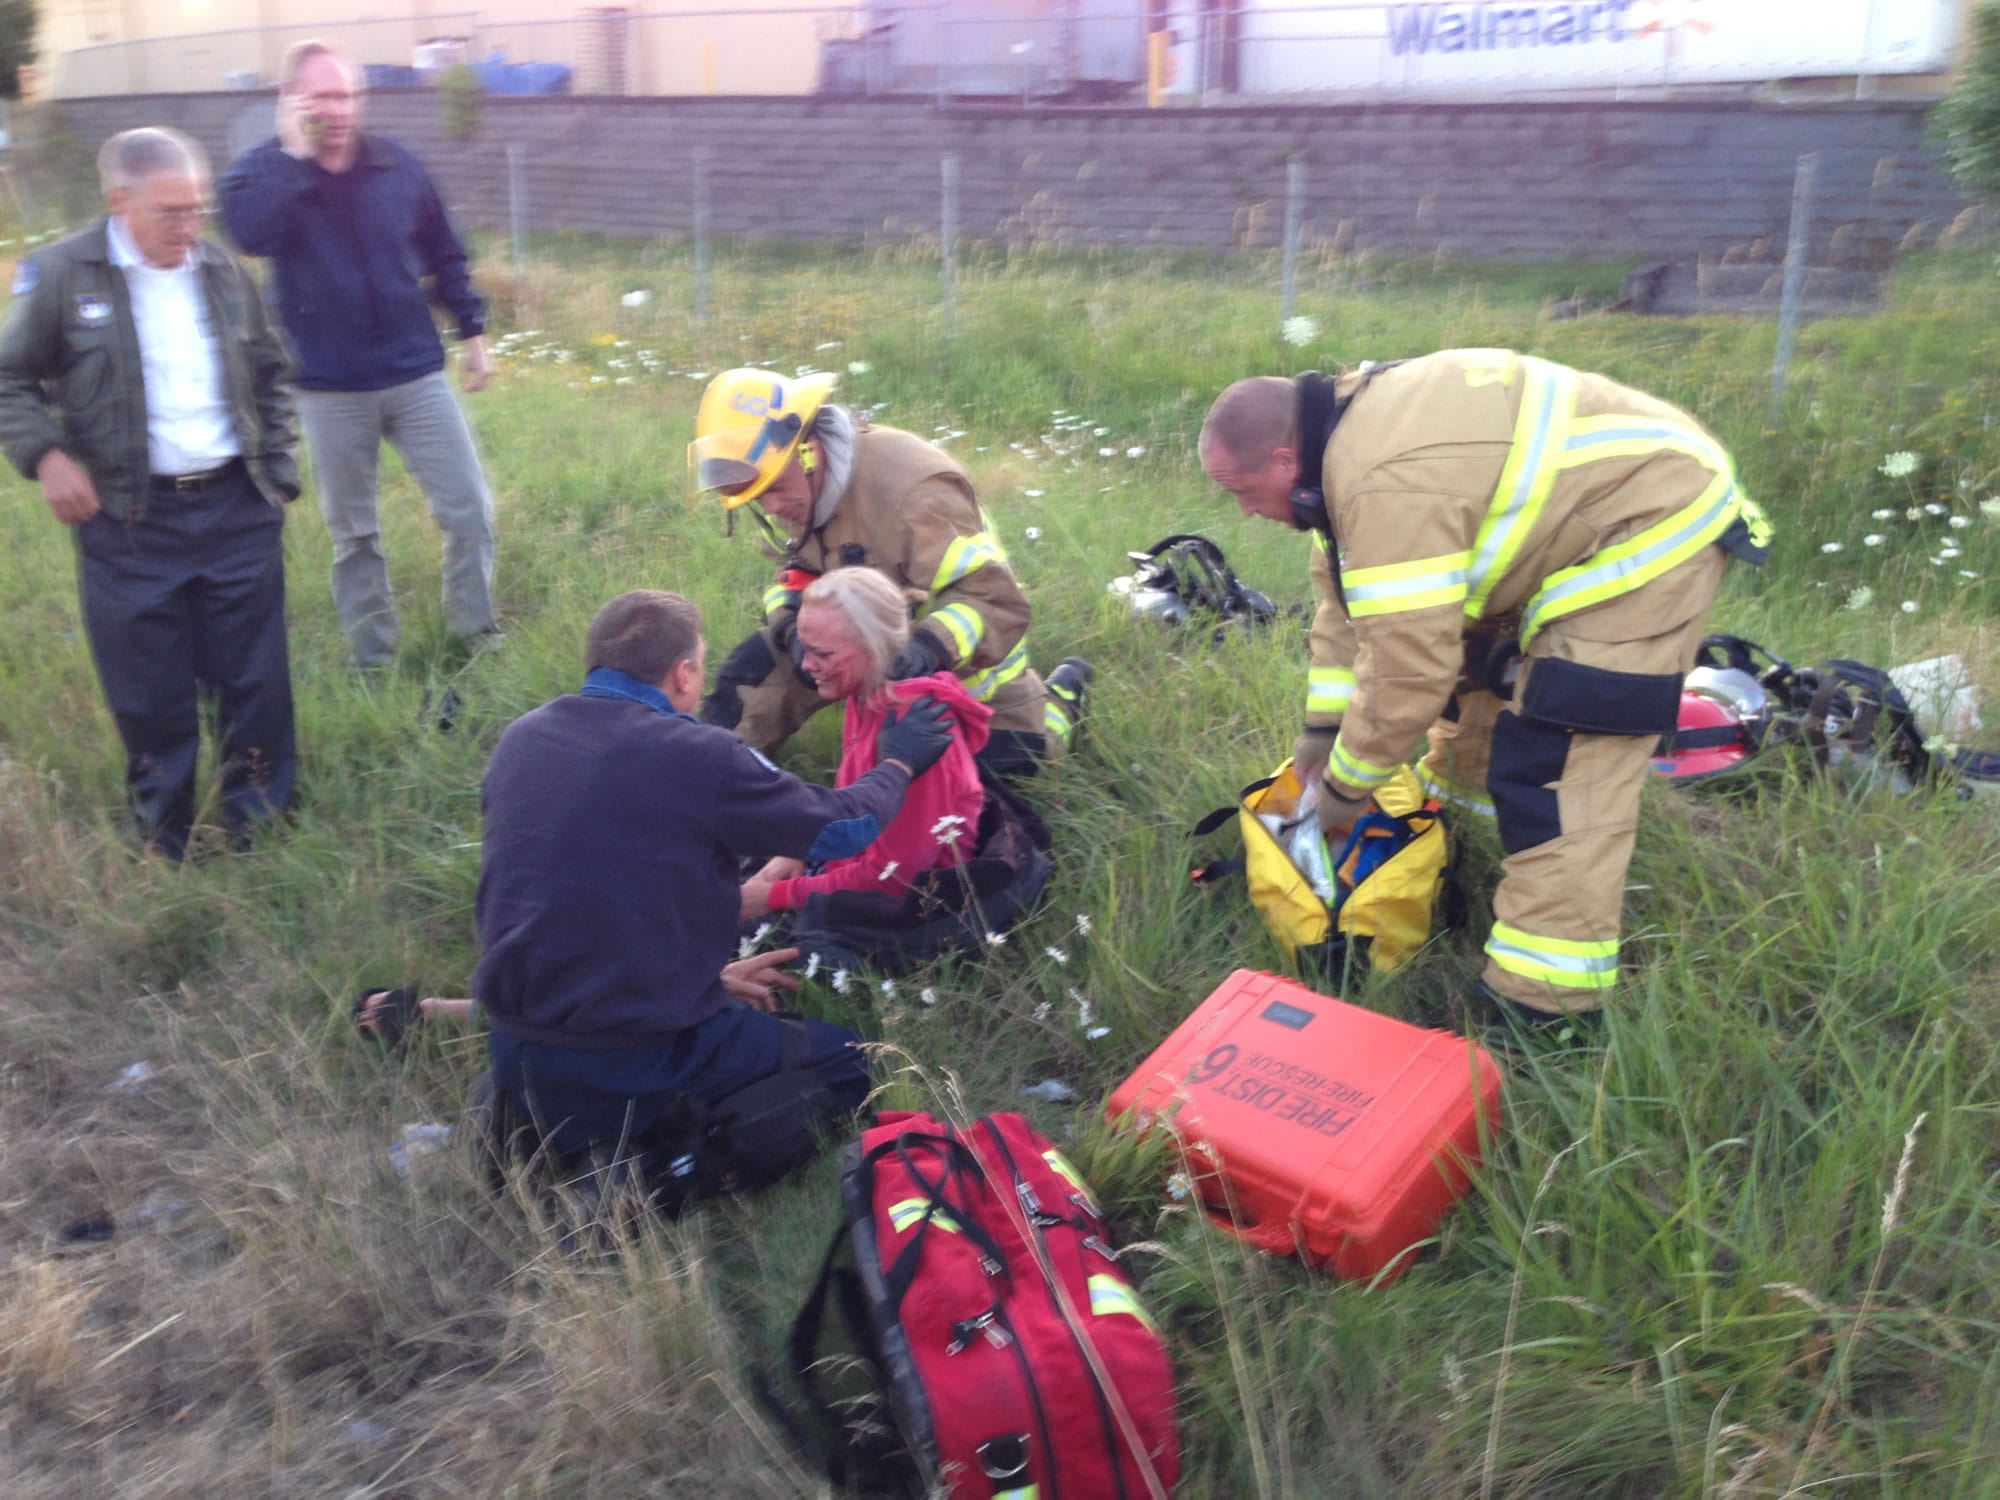 Rescuers tend to an injured woman after an accident on Interstate 5 near Northeast 99th Street early Saturday.